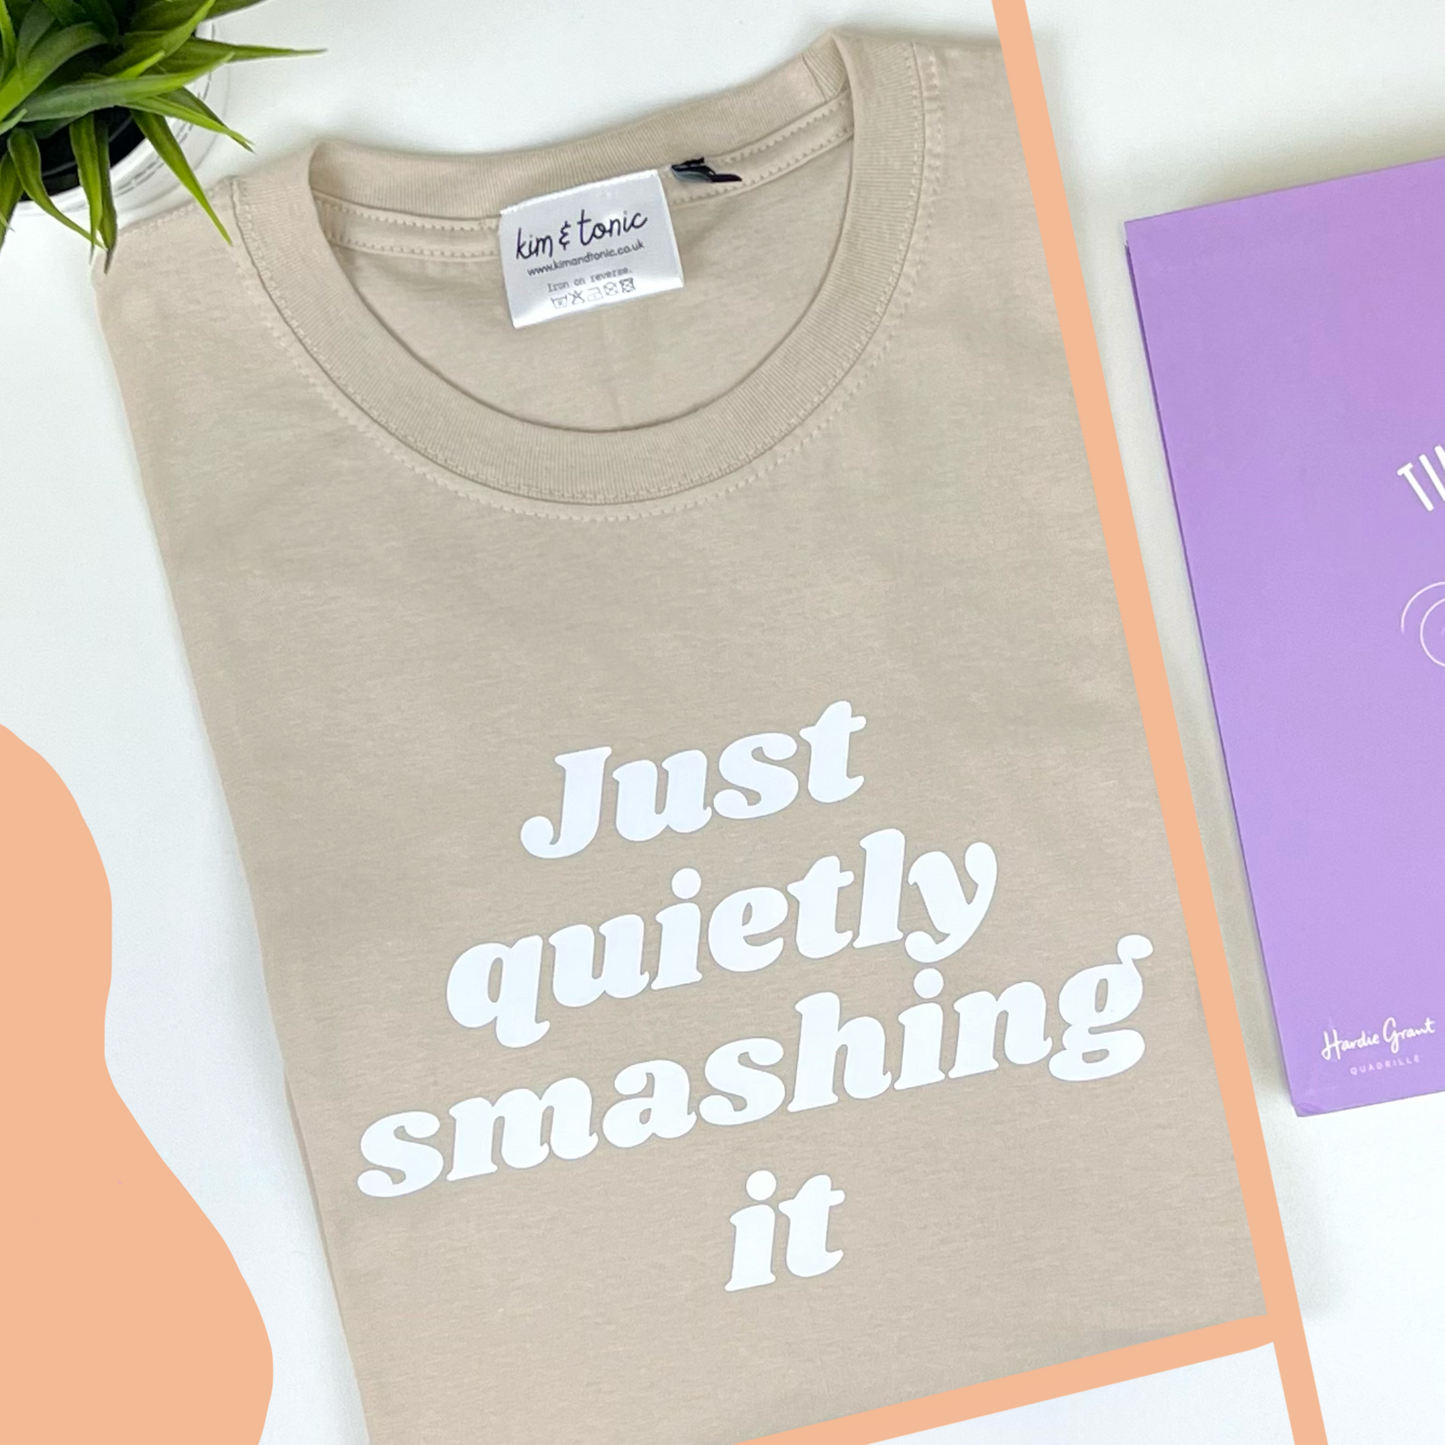 JUST QUIETLY SMASHING IT T-shirt. Sand with white print.